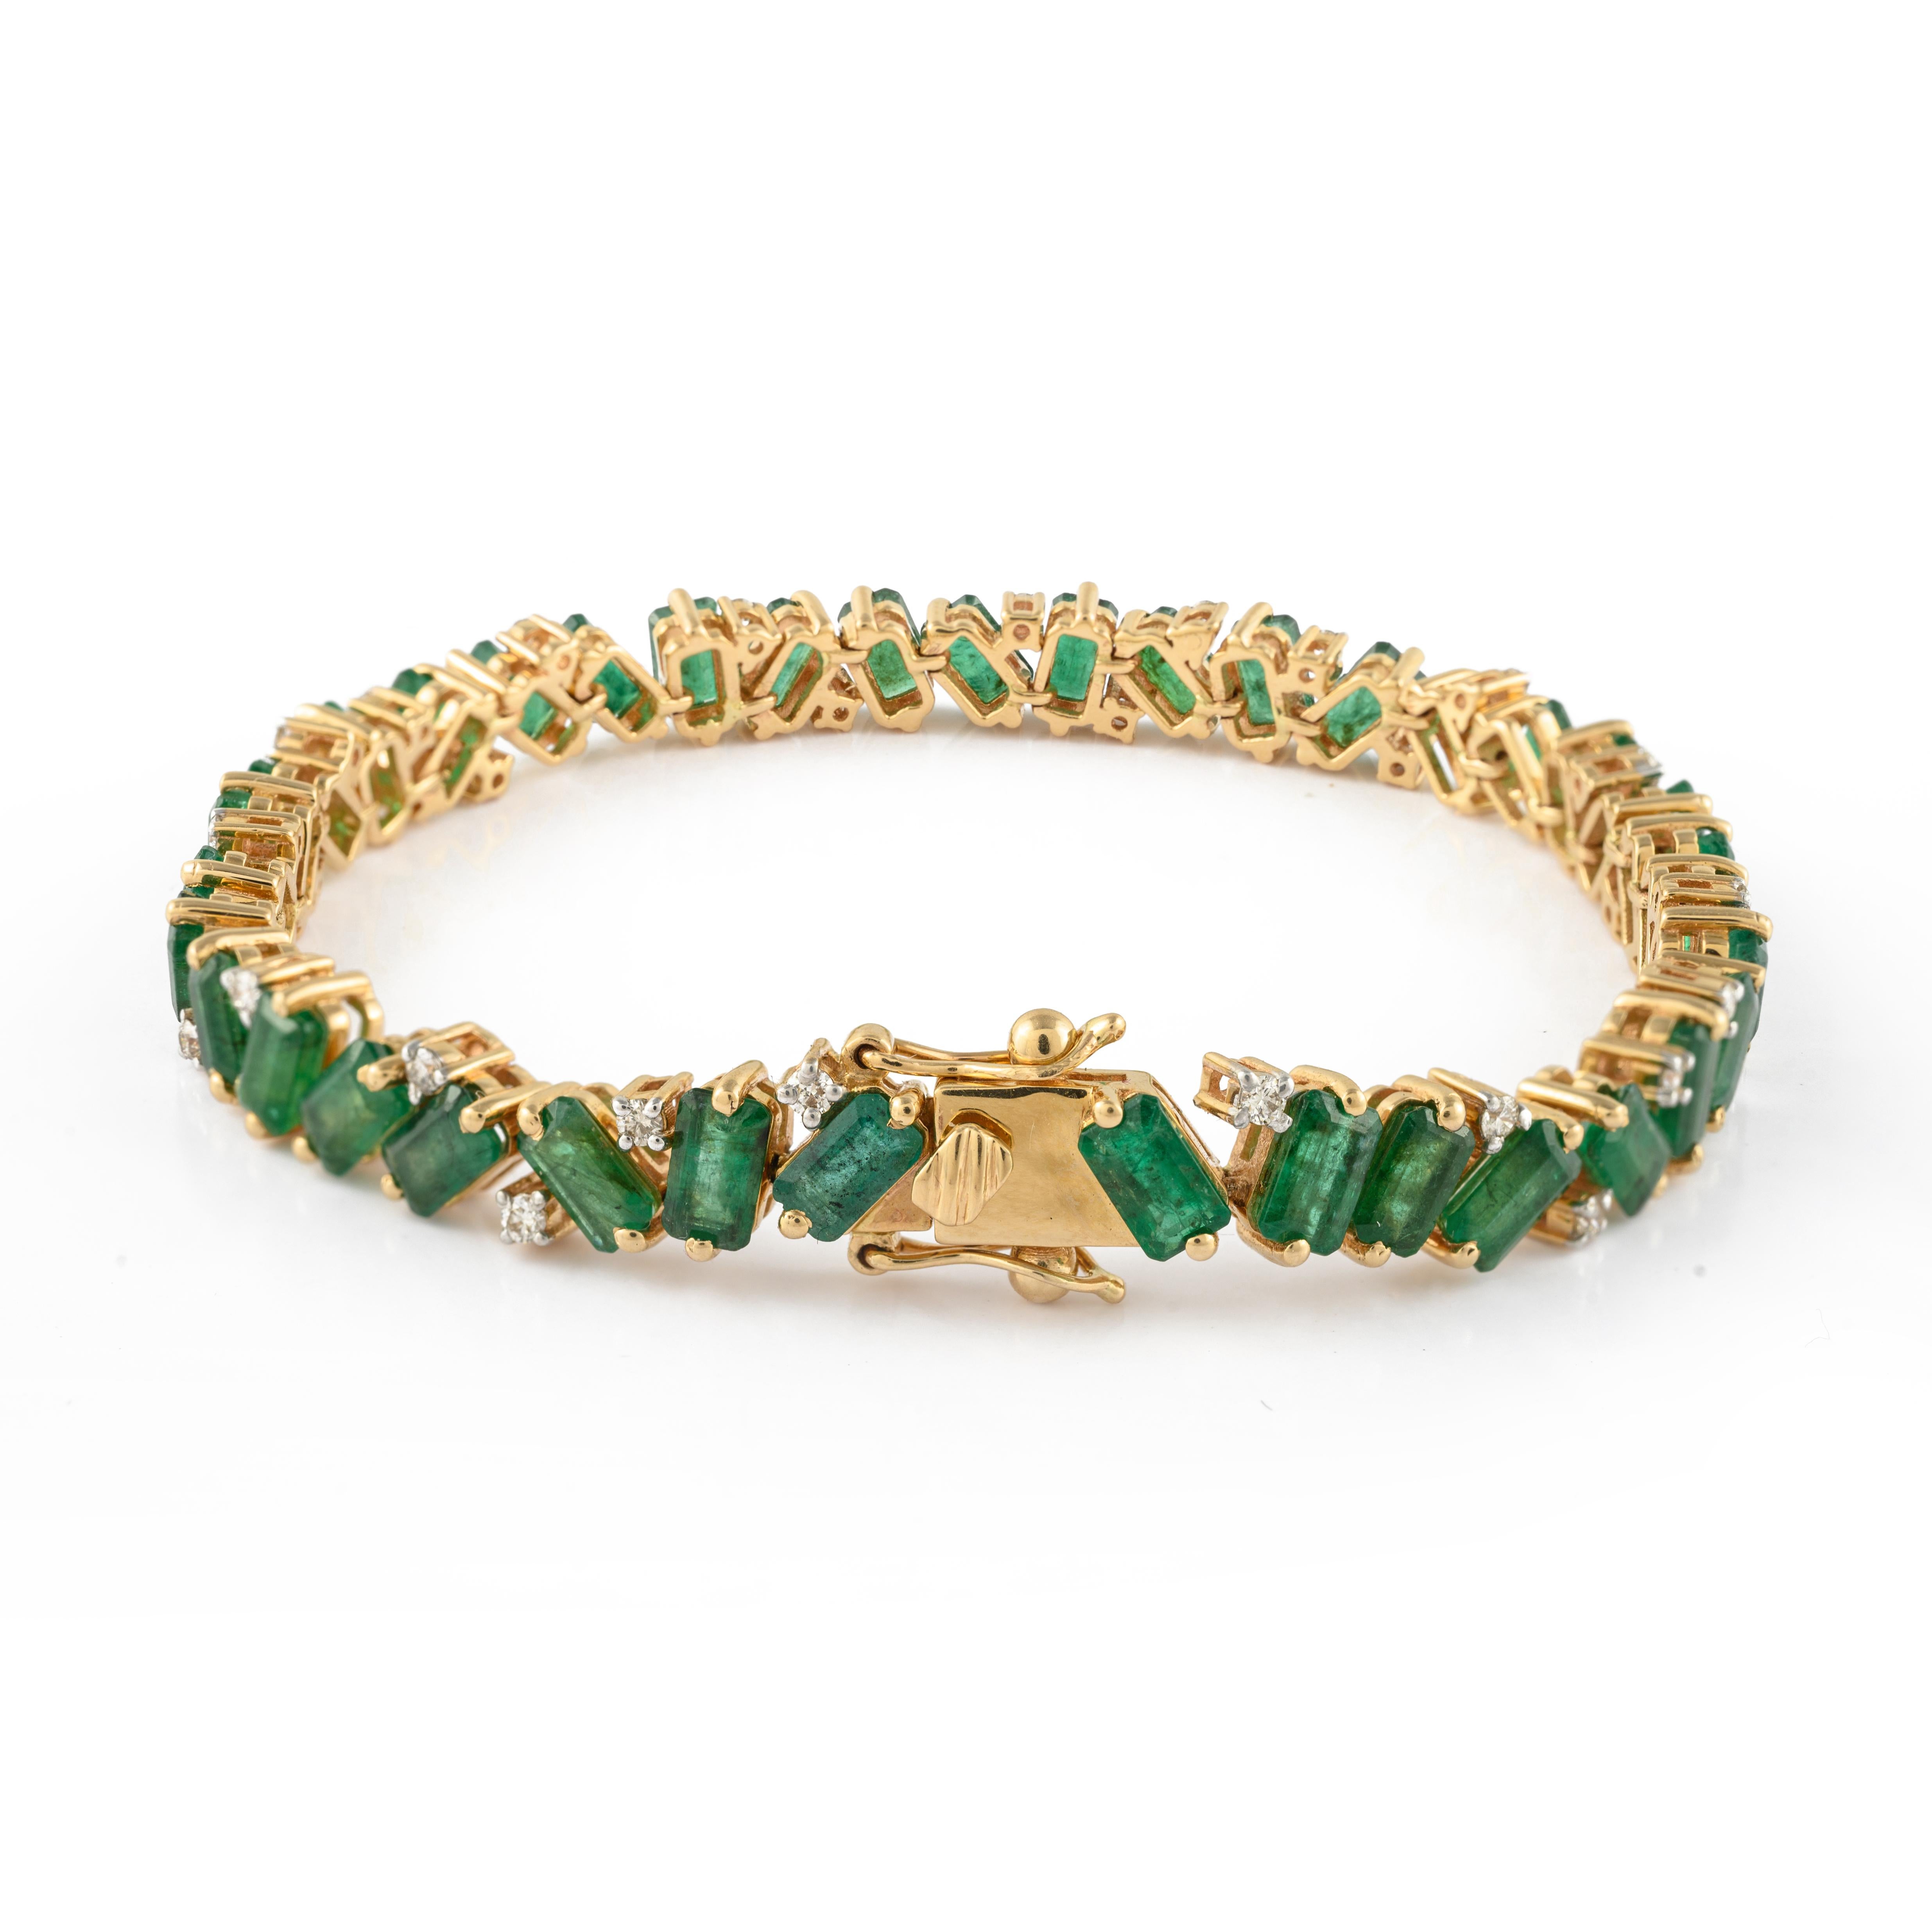 This Unique Diamond and Emerald Tennis Bracelet Set in 14K gold showcases 37 endlessly sparkling natural emeralds, weighing 10.68 carats. It measures 7 inches long in length. 
Emerald enhances intellectual capacity of the person.
Designed with